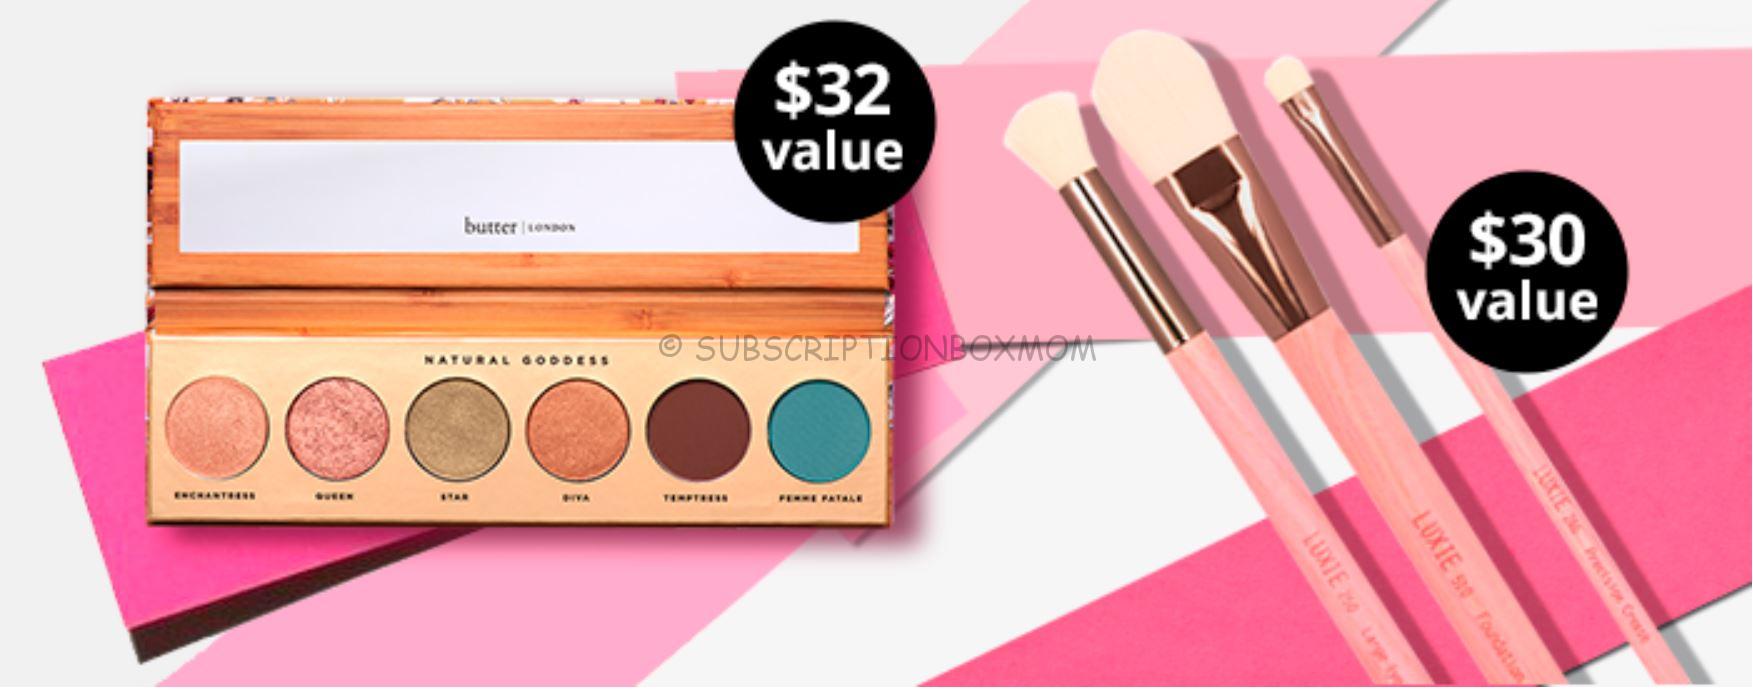 Boxycharm August 2019 Coupon